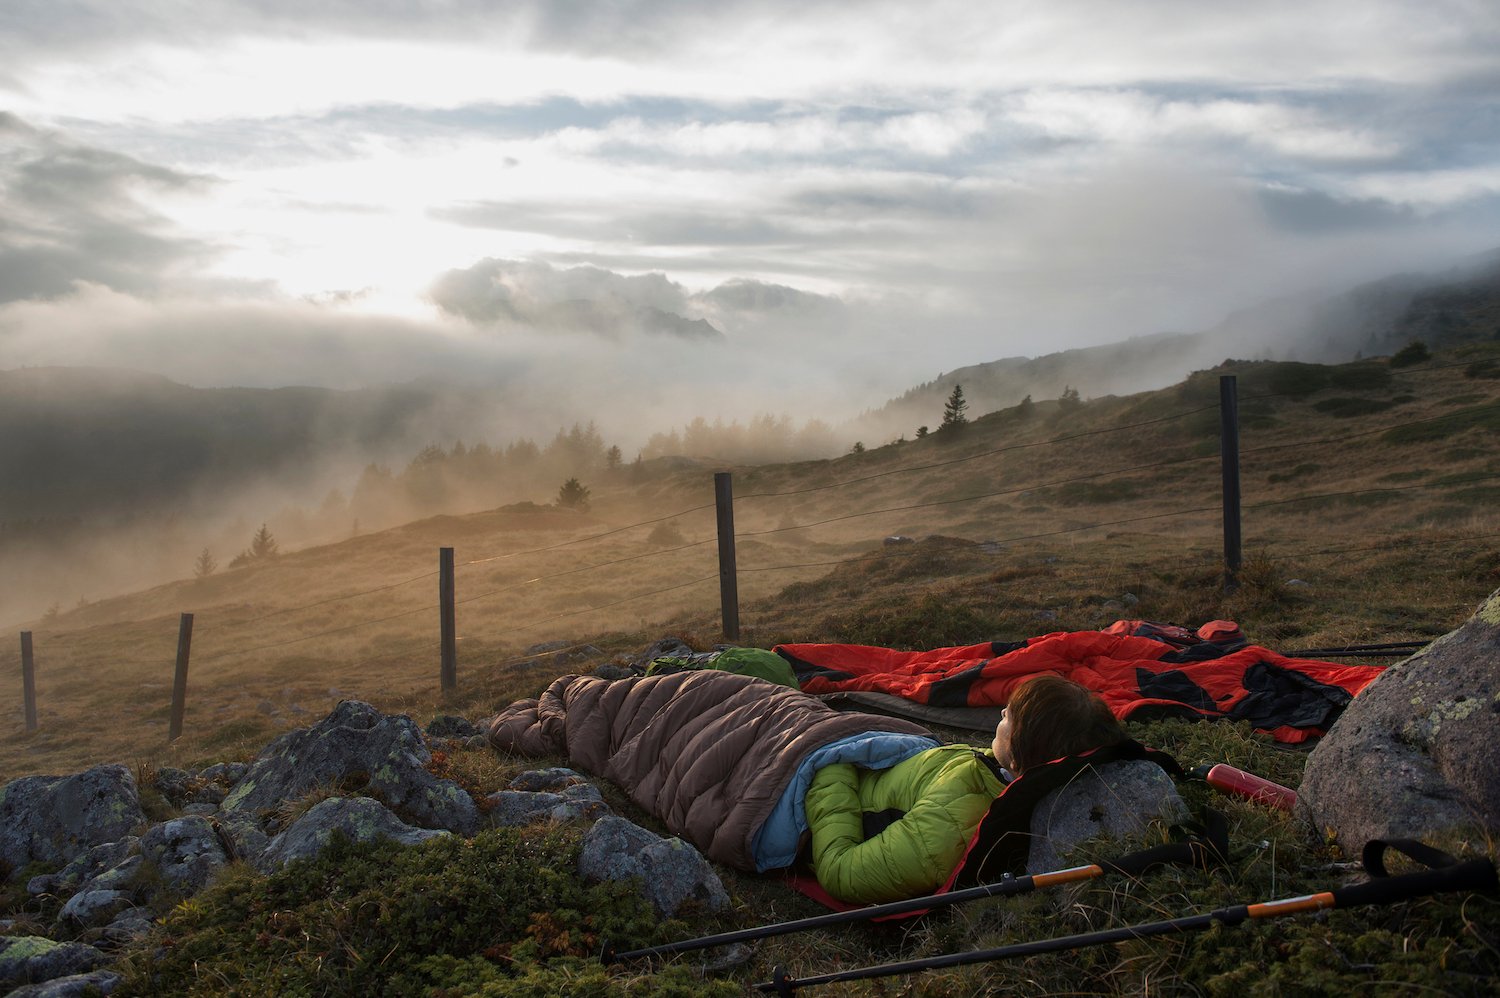 A woman is sleeping in a sleeping bag, looking out on a misty hill